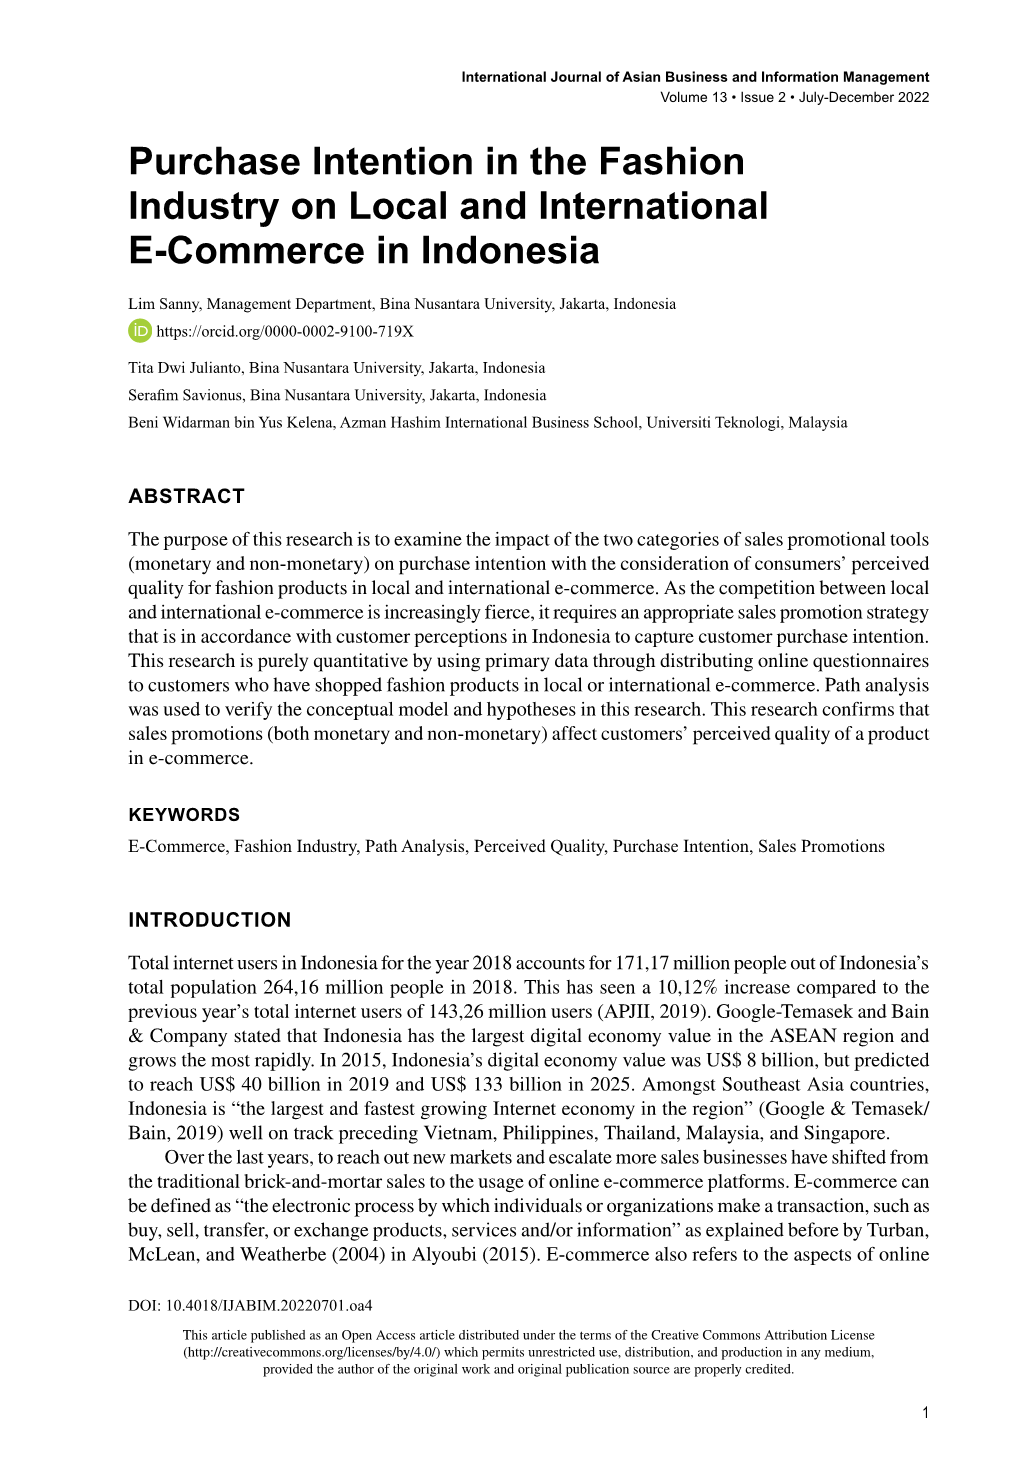 Purchase Intention in the Fashion Industry on Local and International E-Commerce in Indonesia